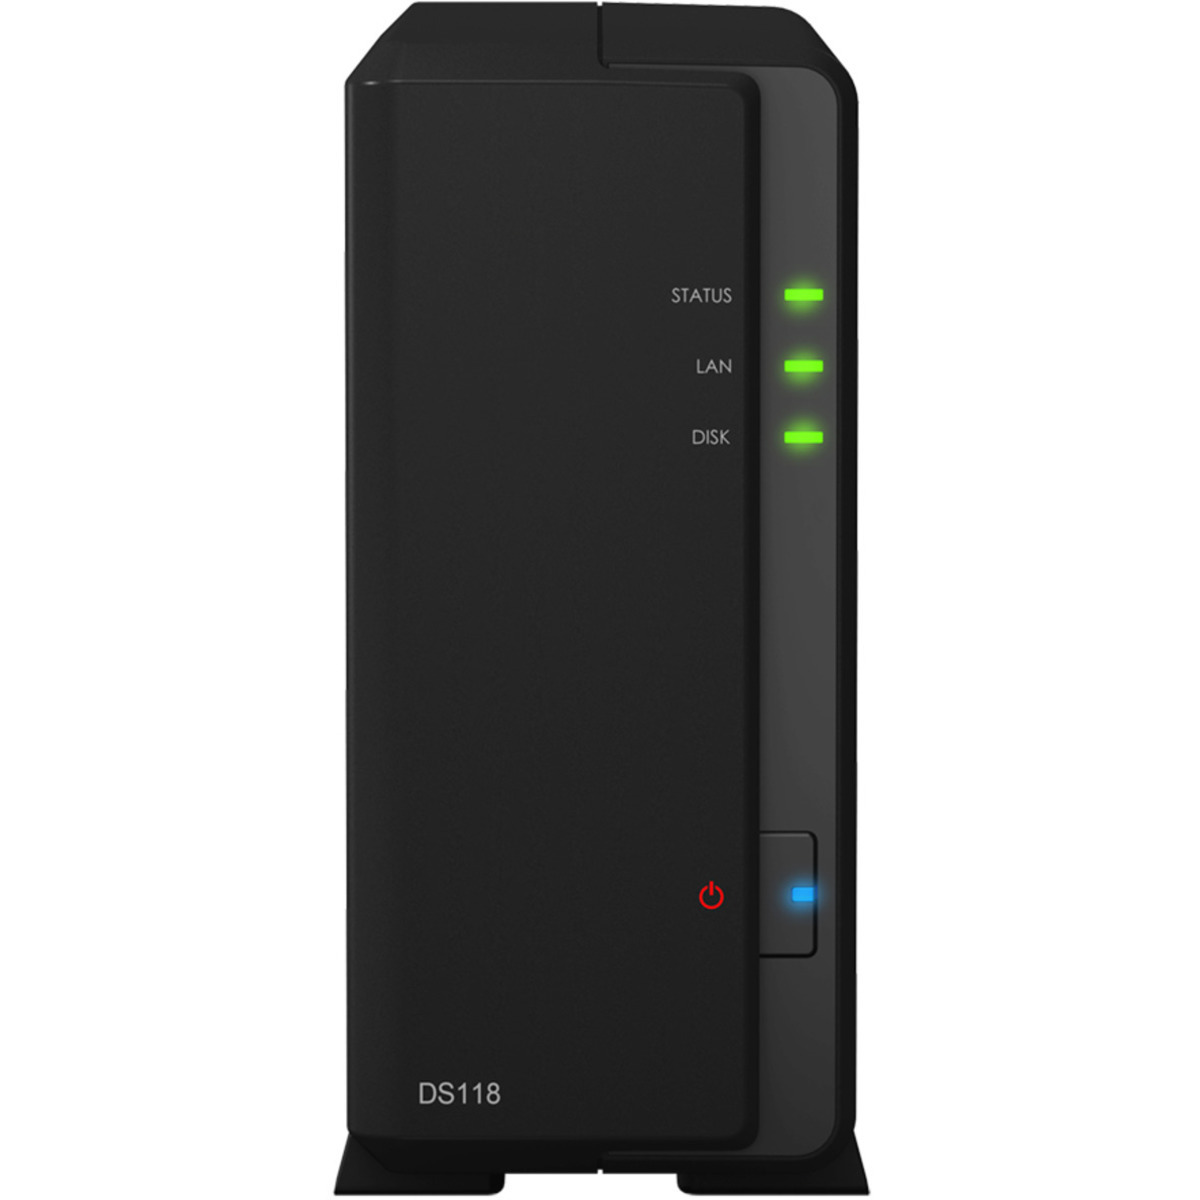 buy $1178 Synology DiskStation DS118 8tb Desktop NAS - Network Attached Storage Device 1x8000gb Samsung 870 QVO MZ-77Q8T0 2.5 SATA 6Gb/s SSD CONSUMER Class Drives Installed - Burn-In Tested - nas headquarters buy network attached storage server device das new raid-5 free shipping usa christmas new year holiday sale DiskStation DS118